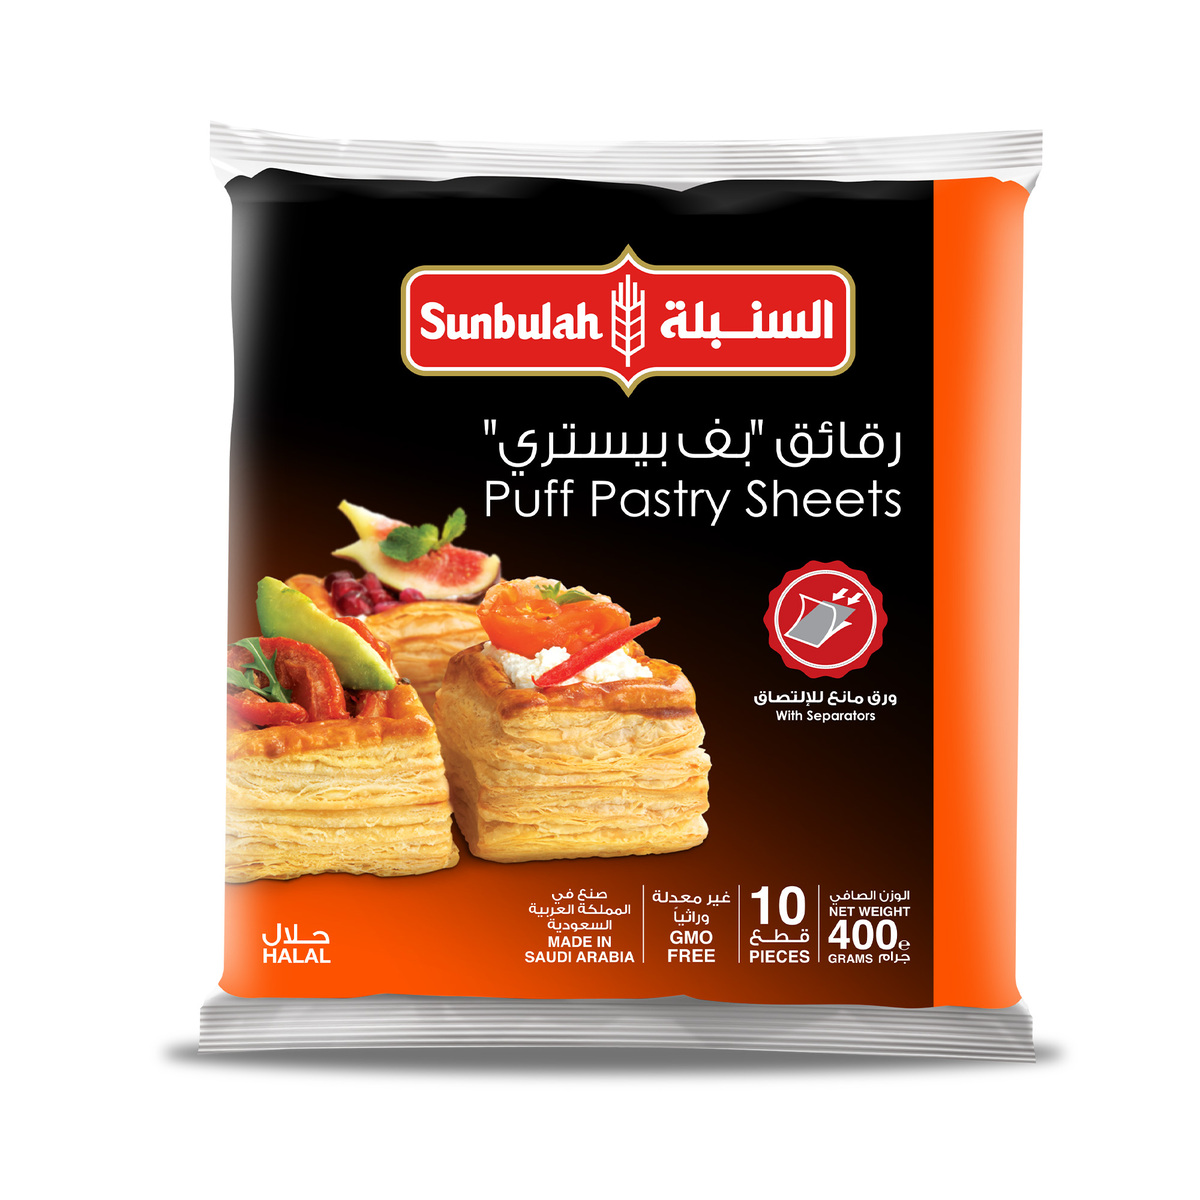 Buy Sunbulah Puff Pastry Sheets 400 g Online at Best Price | Frozen Pastry | Lulu Egypt in Saudi Arabia